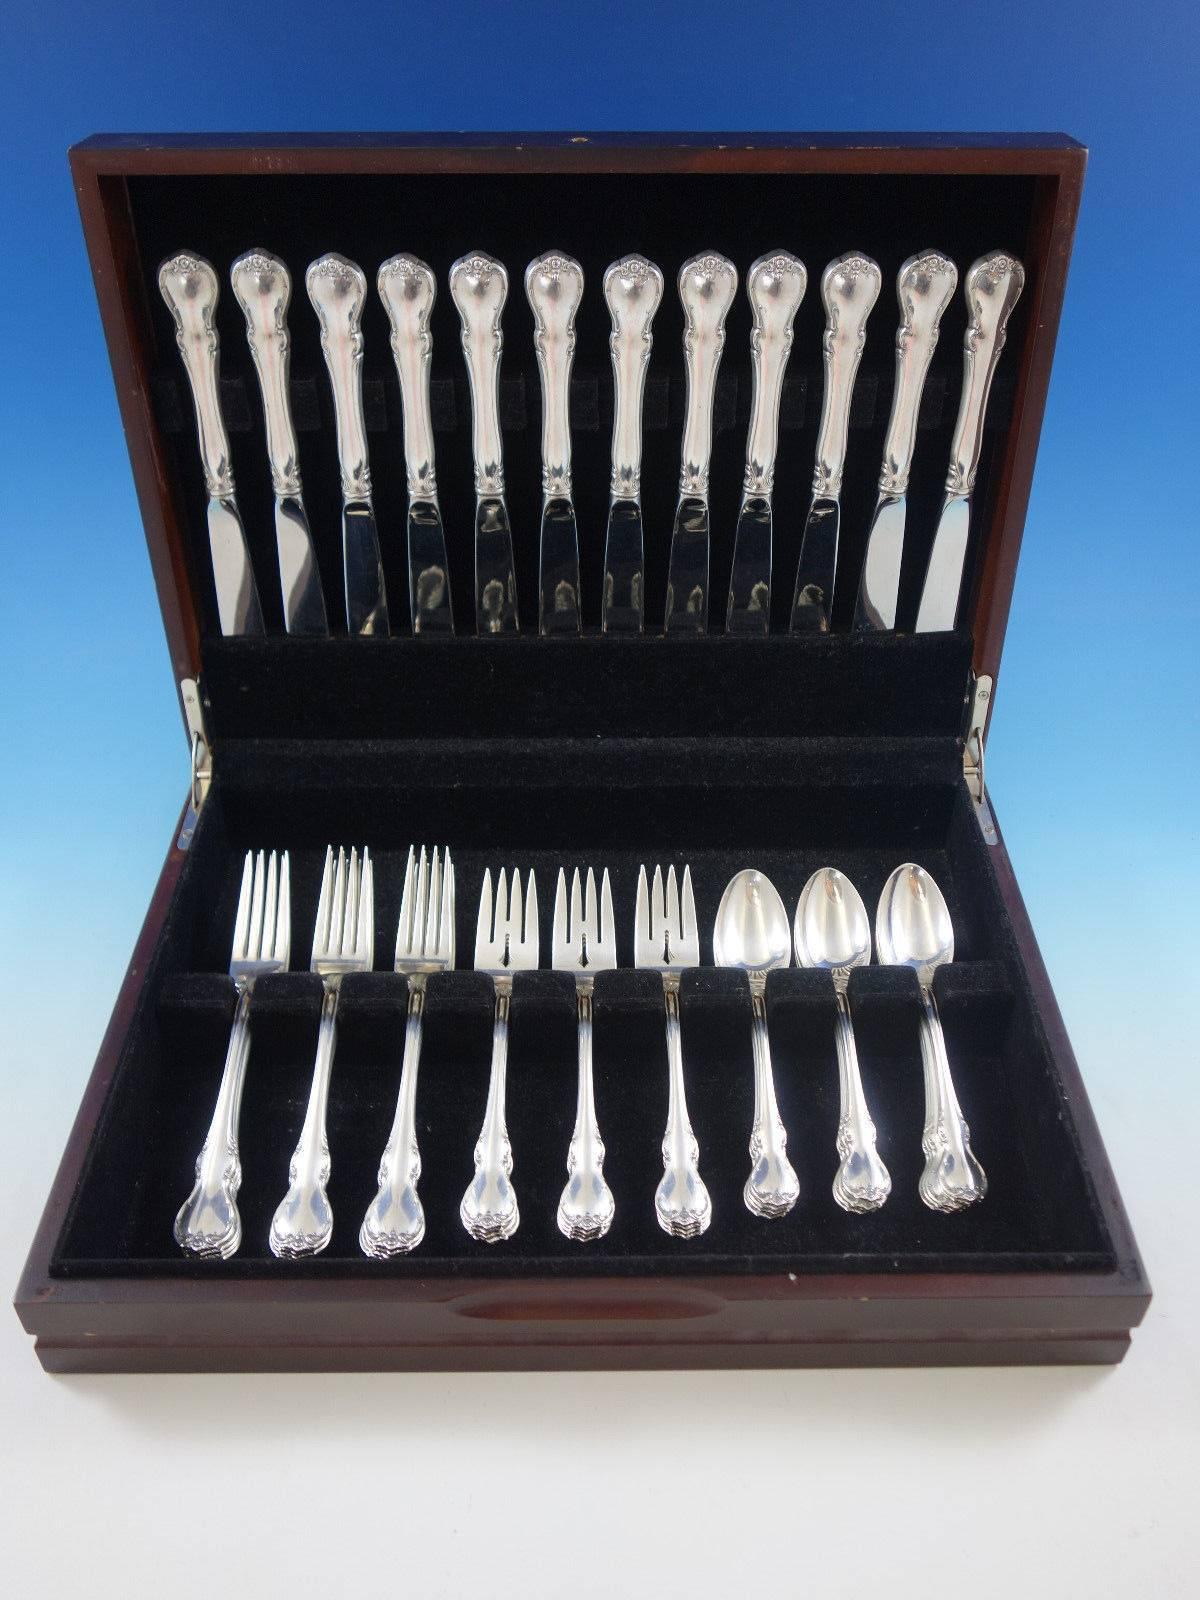 French Provincial by Towle sterling silver flatware set, 48 pieces. This set includes: 

12 knives, 9 1/8